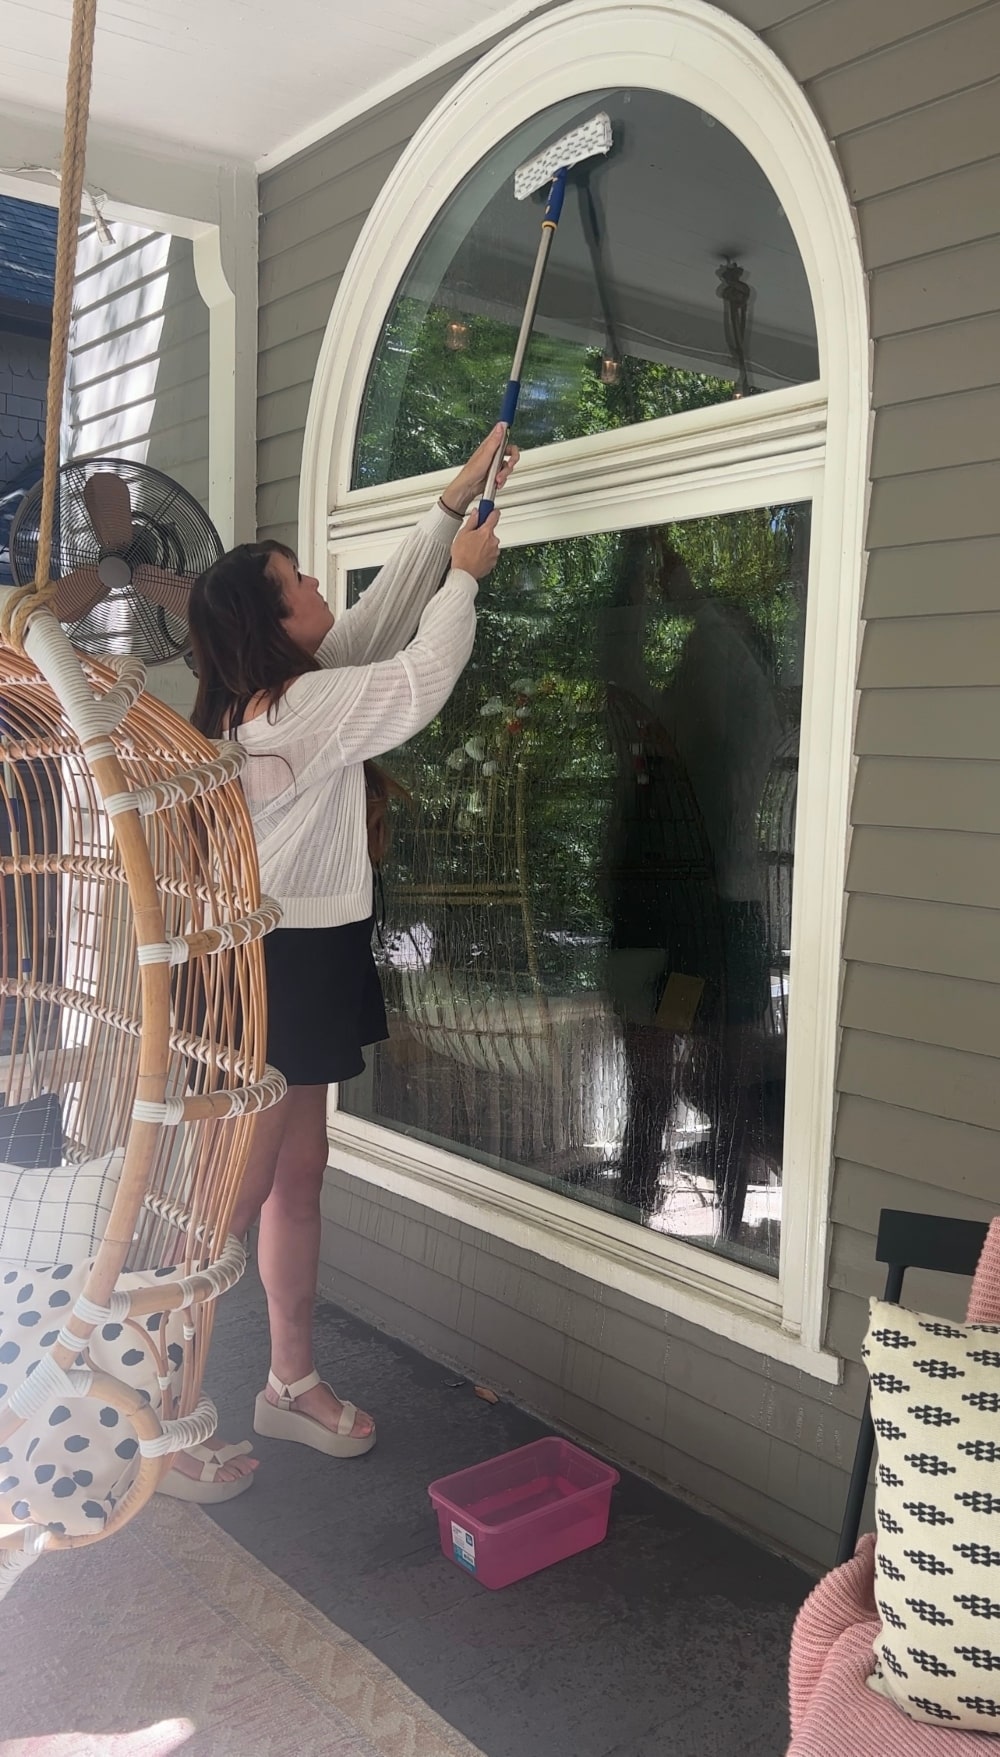 Effortless Window Cleaning: DIY Natural Solution and Telescoping System. Save money by cleaning your windows yourself with this streak-free homemade window cleaning solution and telescoping pole system.